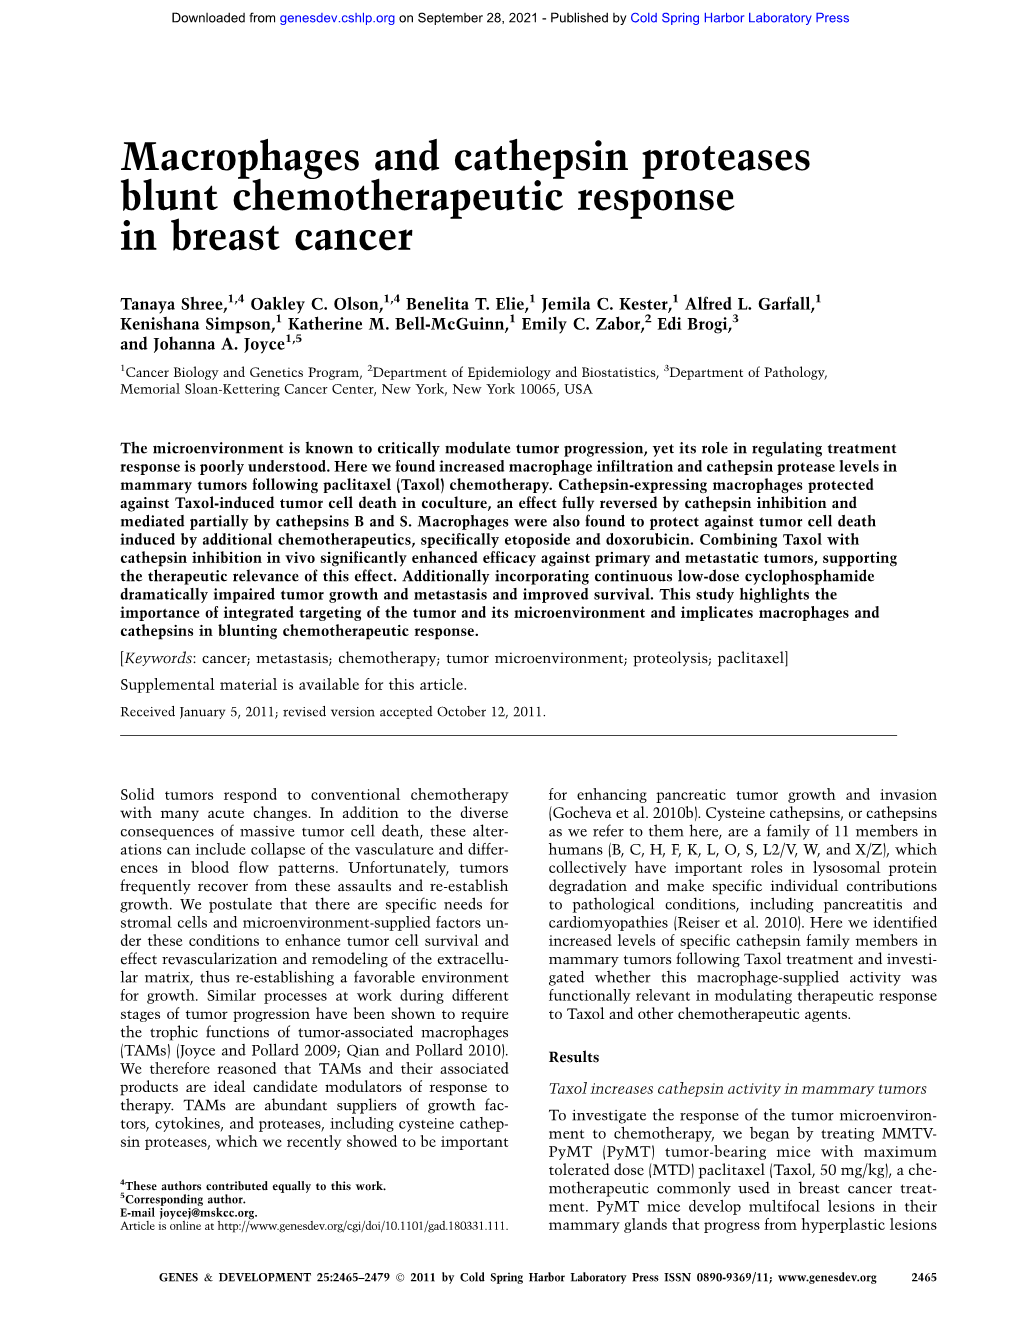 Macrophages and Cathepsin Proteases Blunt Chemotherapeutic Response in Breast Cancer